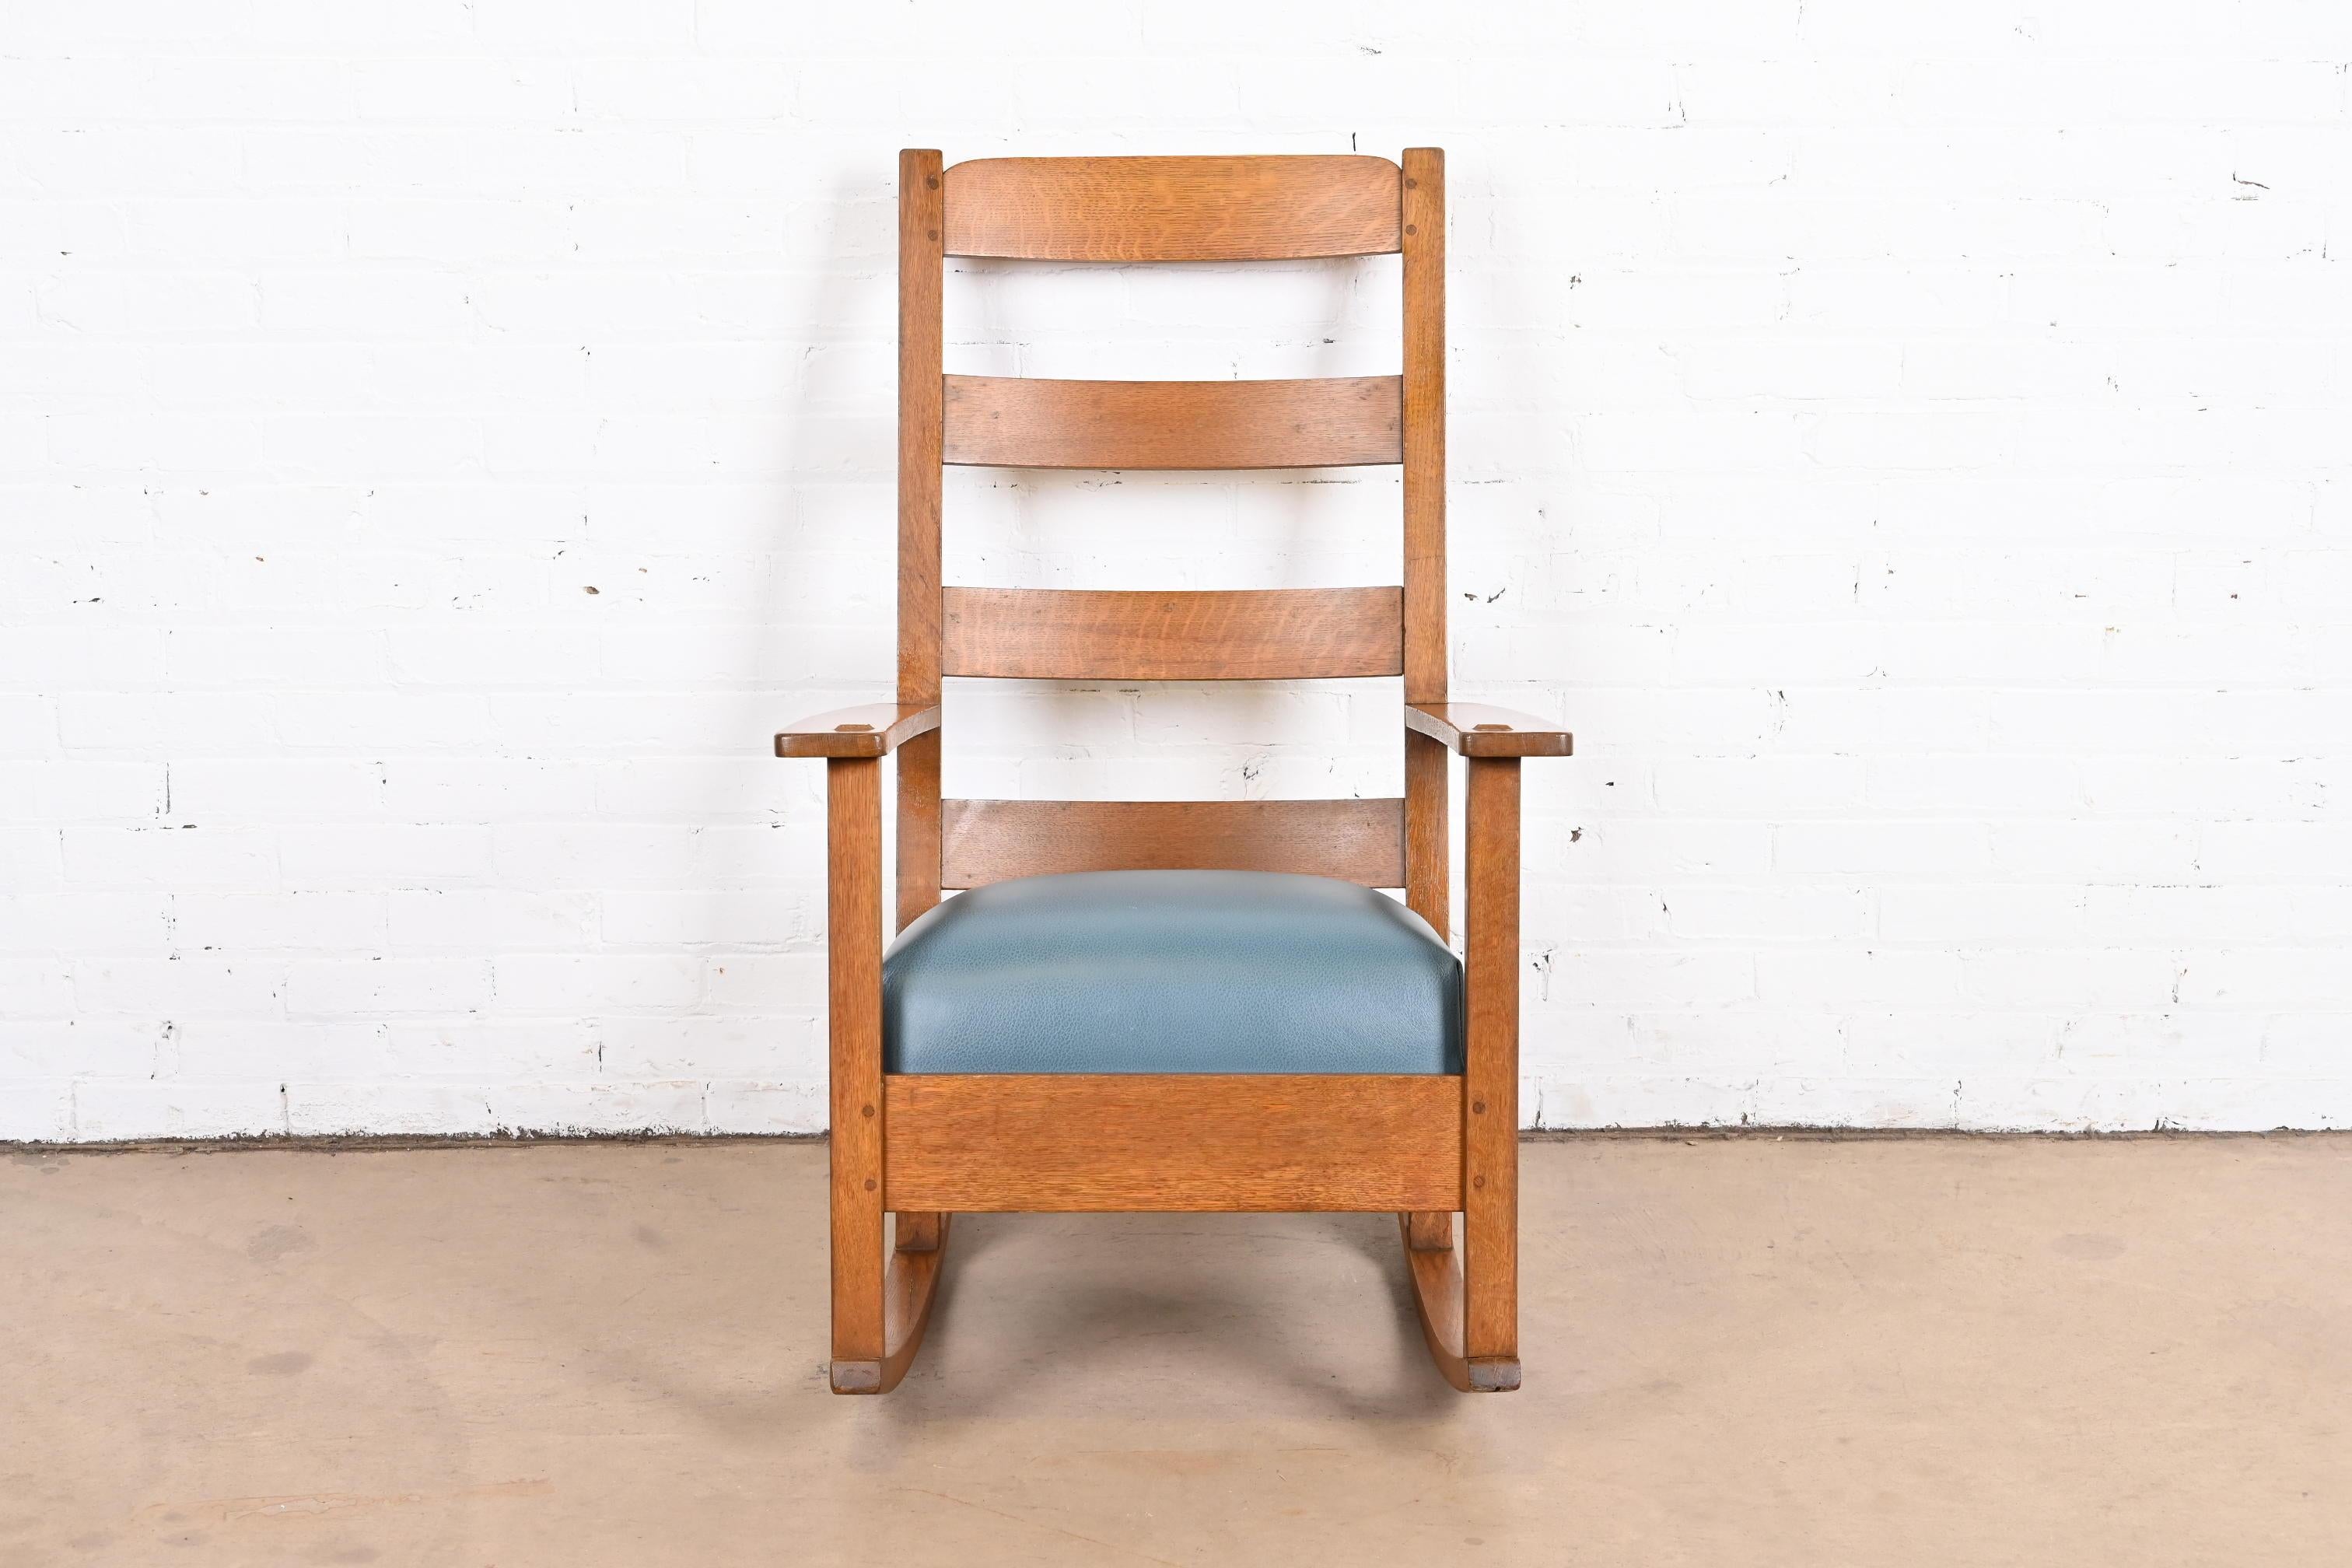 A gorgeous Mission or Arts & Crafts rocking chair

By Charles P. Limbert Co.

USA, circa 1900

Solid quartersawn oak, with newer teal leather upholstered seat.

Measures: 25.75